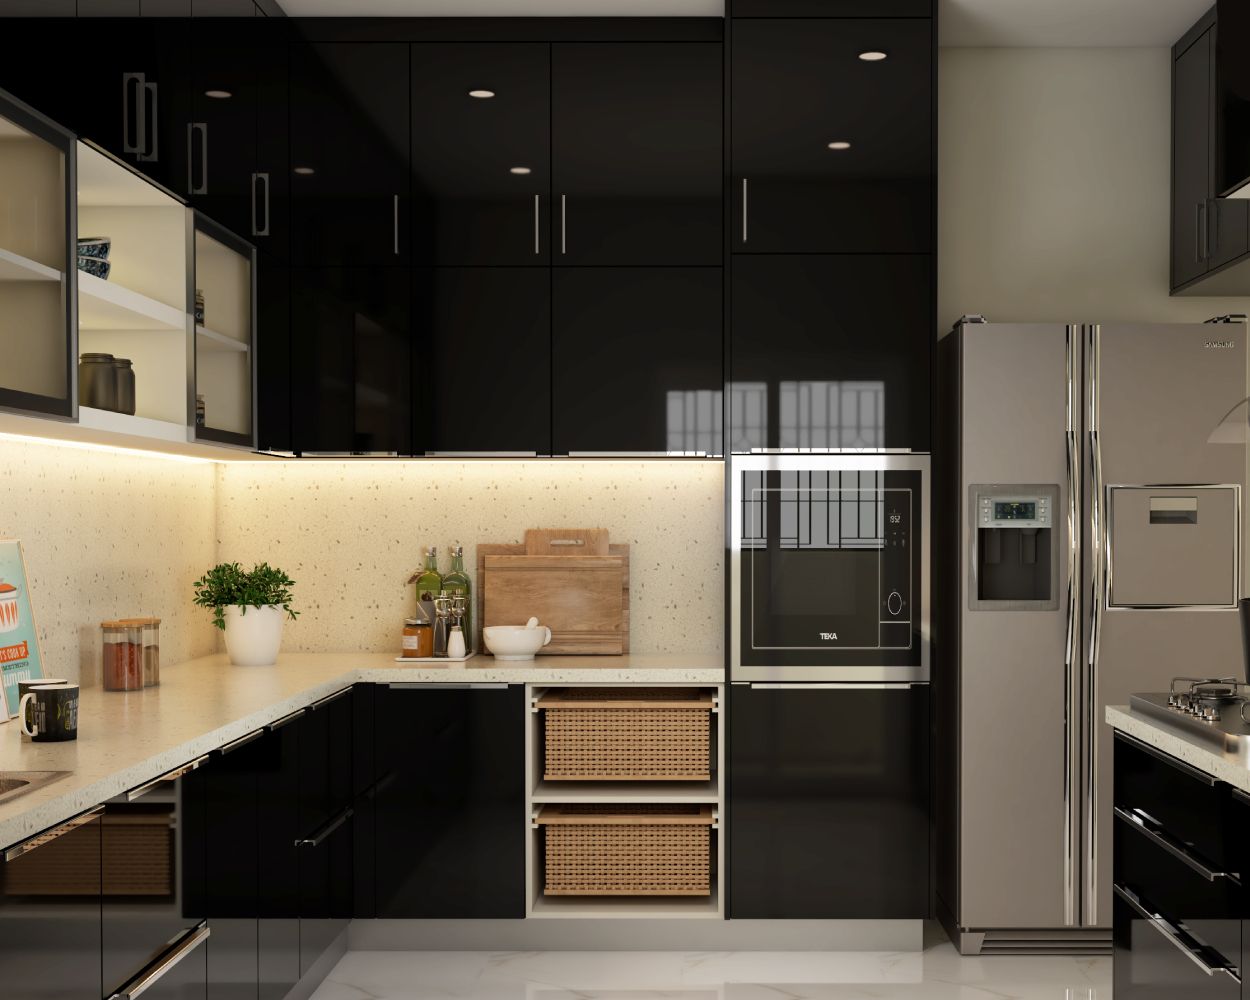 Modern All-Black Glossy Modular Kitchen Design With Ample Storage Options